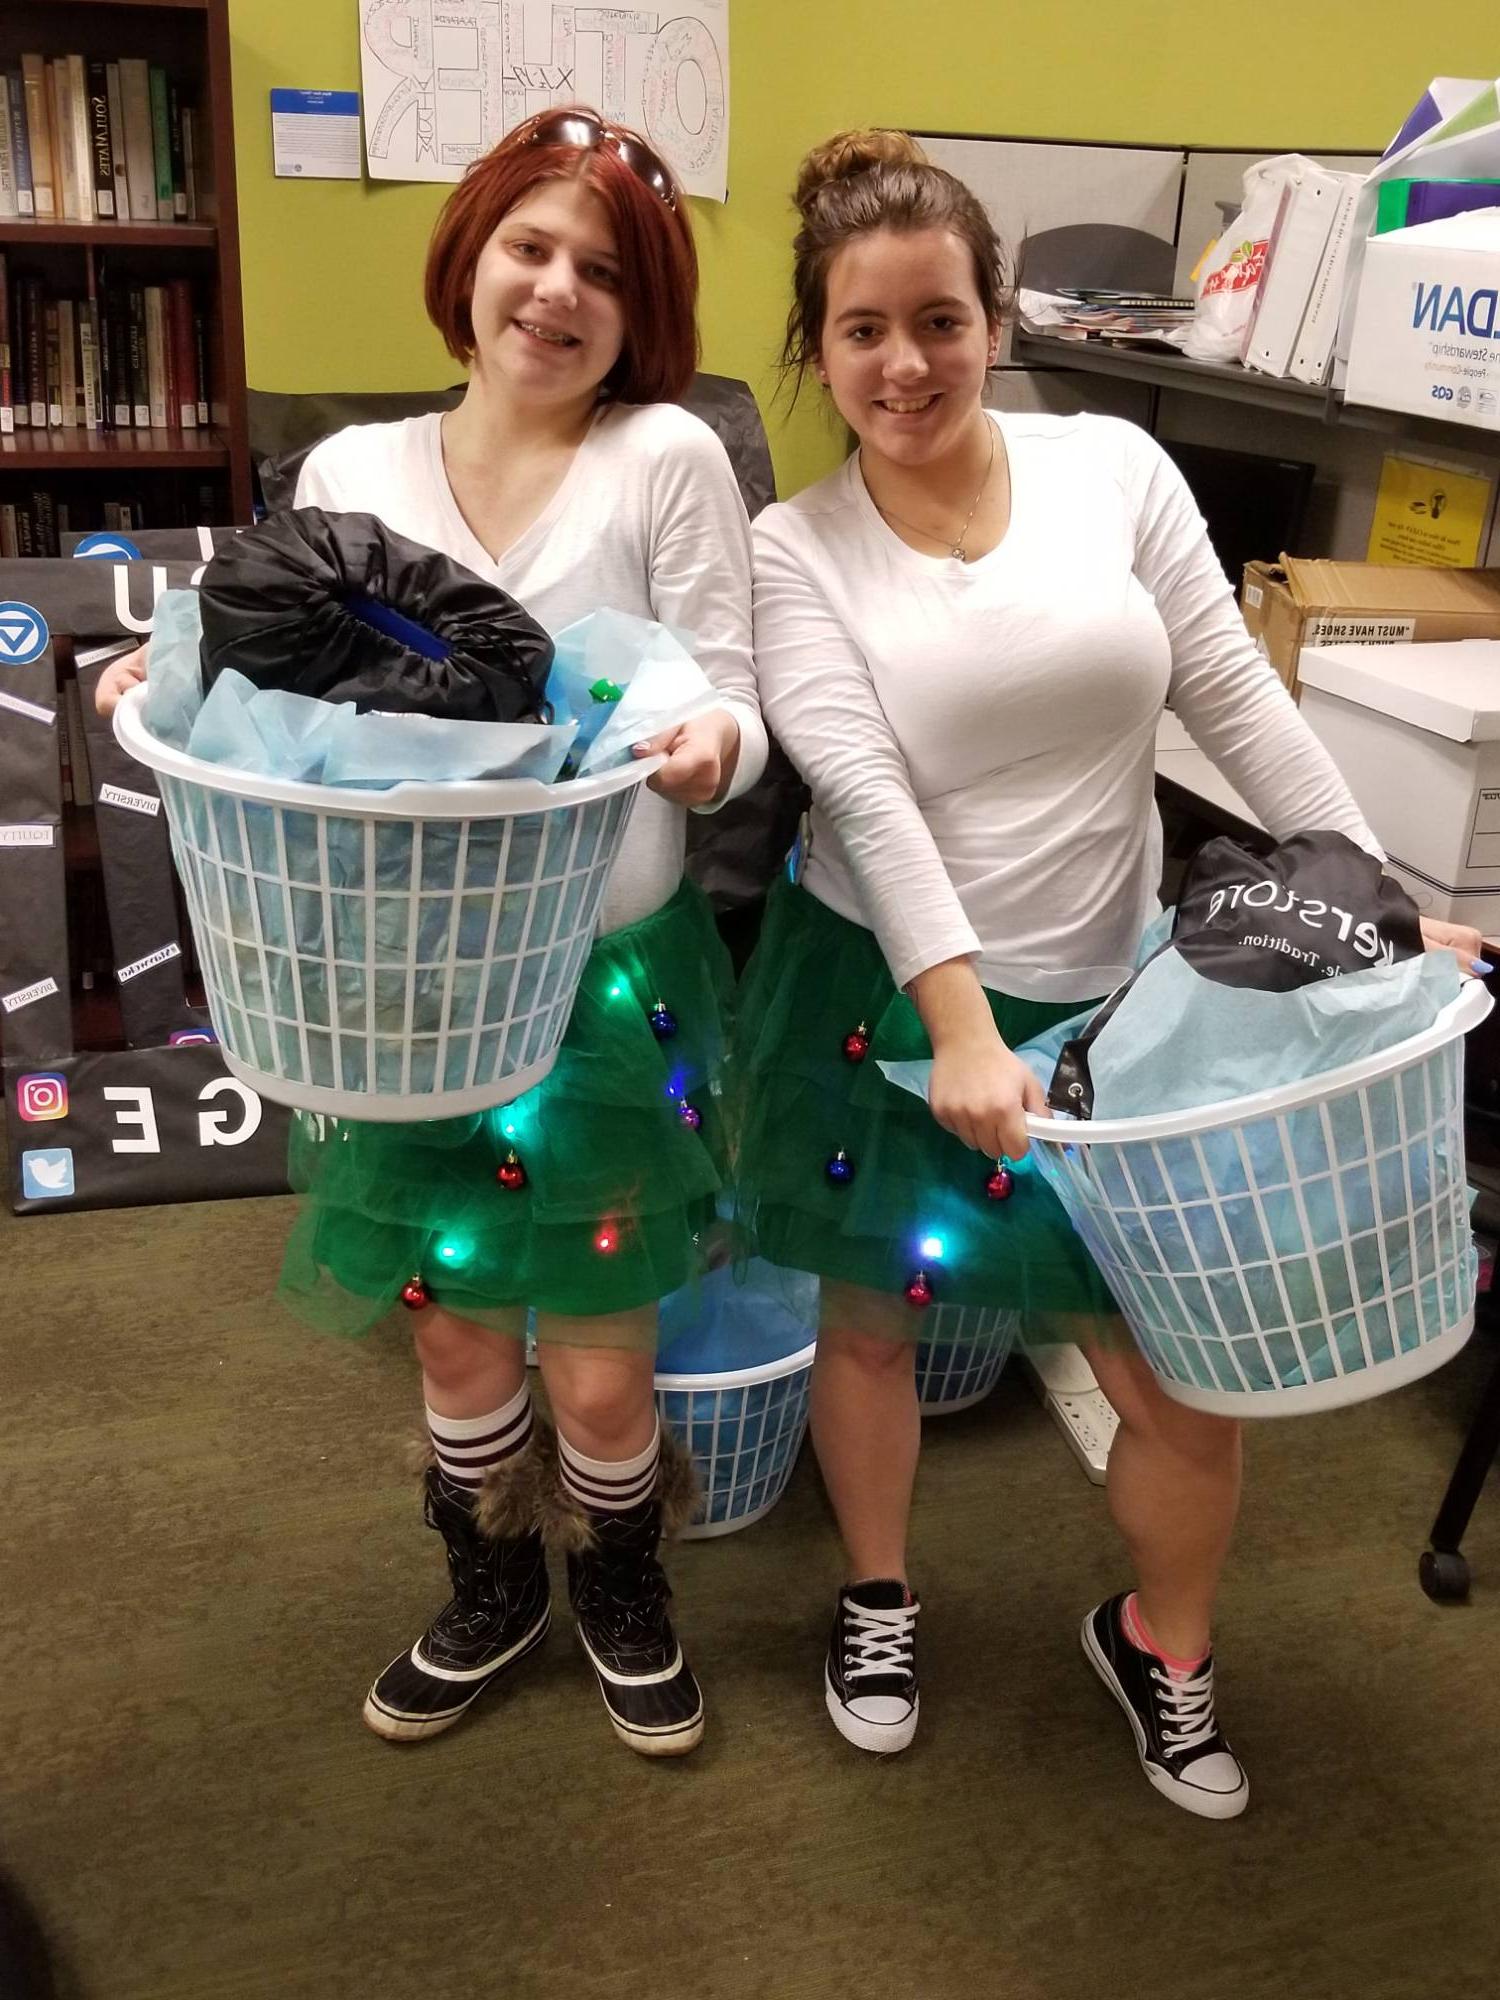 Two students smiling while holding laundry baskets